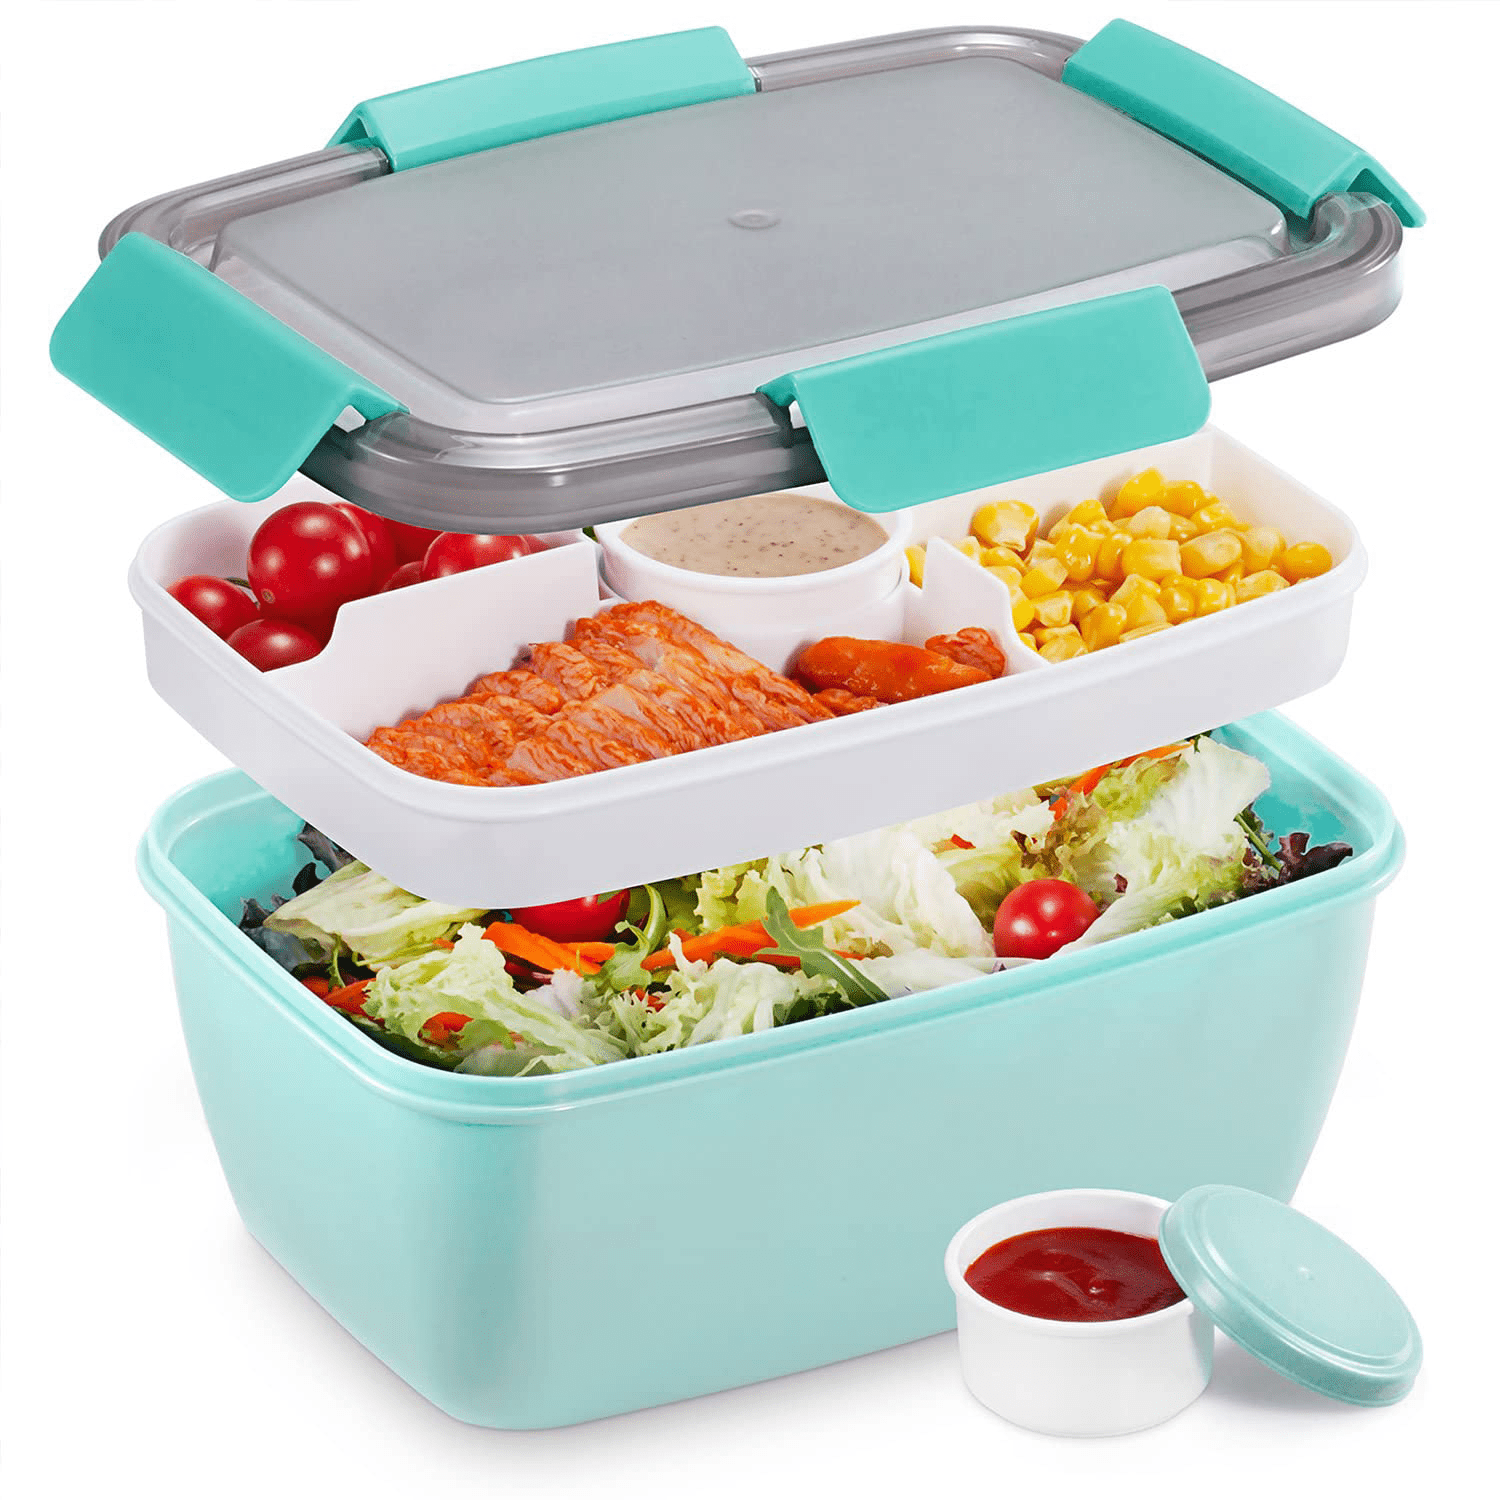 Salad Lunch Container To Go - 40-oz Salad Bowl with 5-Compartments Bento  Style Tray, Salad Lunch Box with Reusable Fork Spoon and Sauce Container 